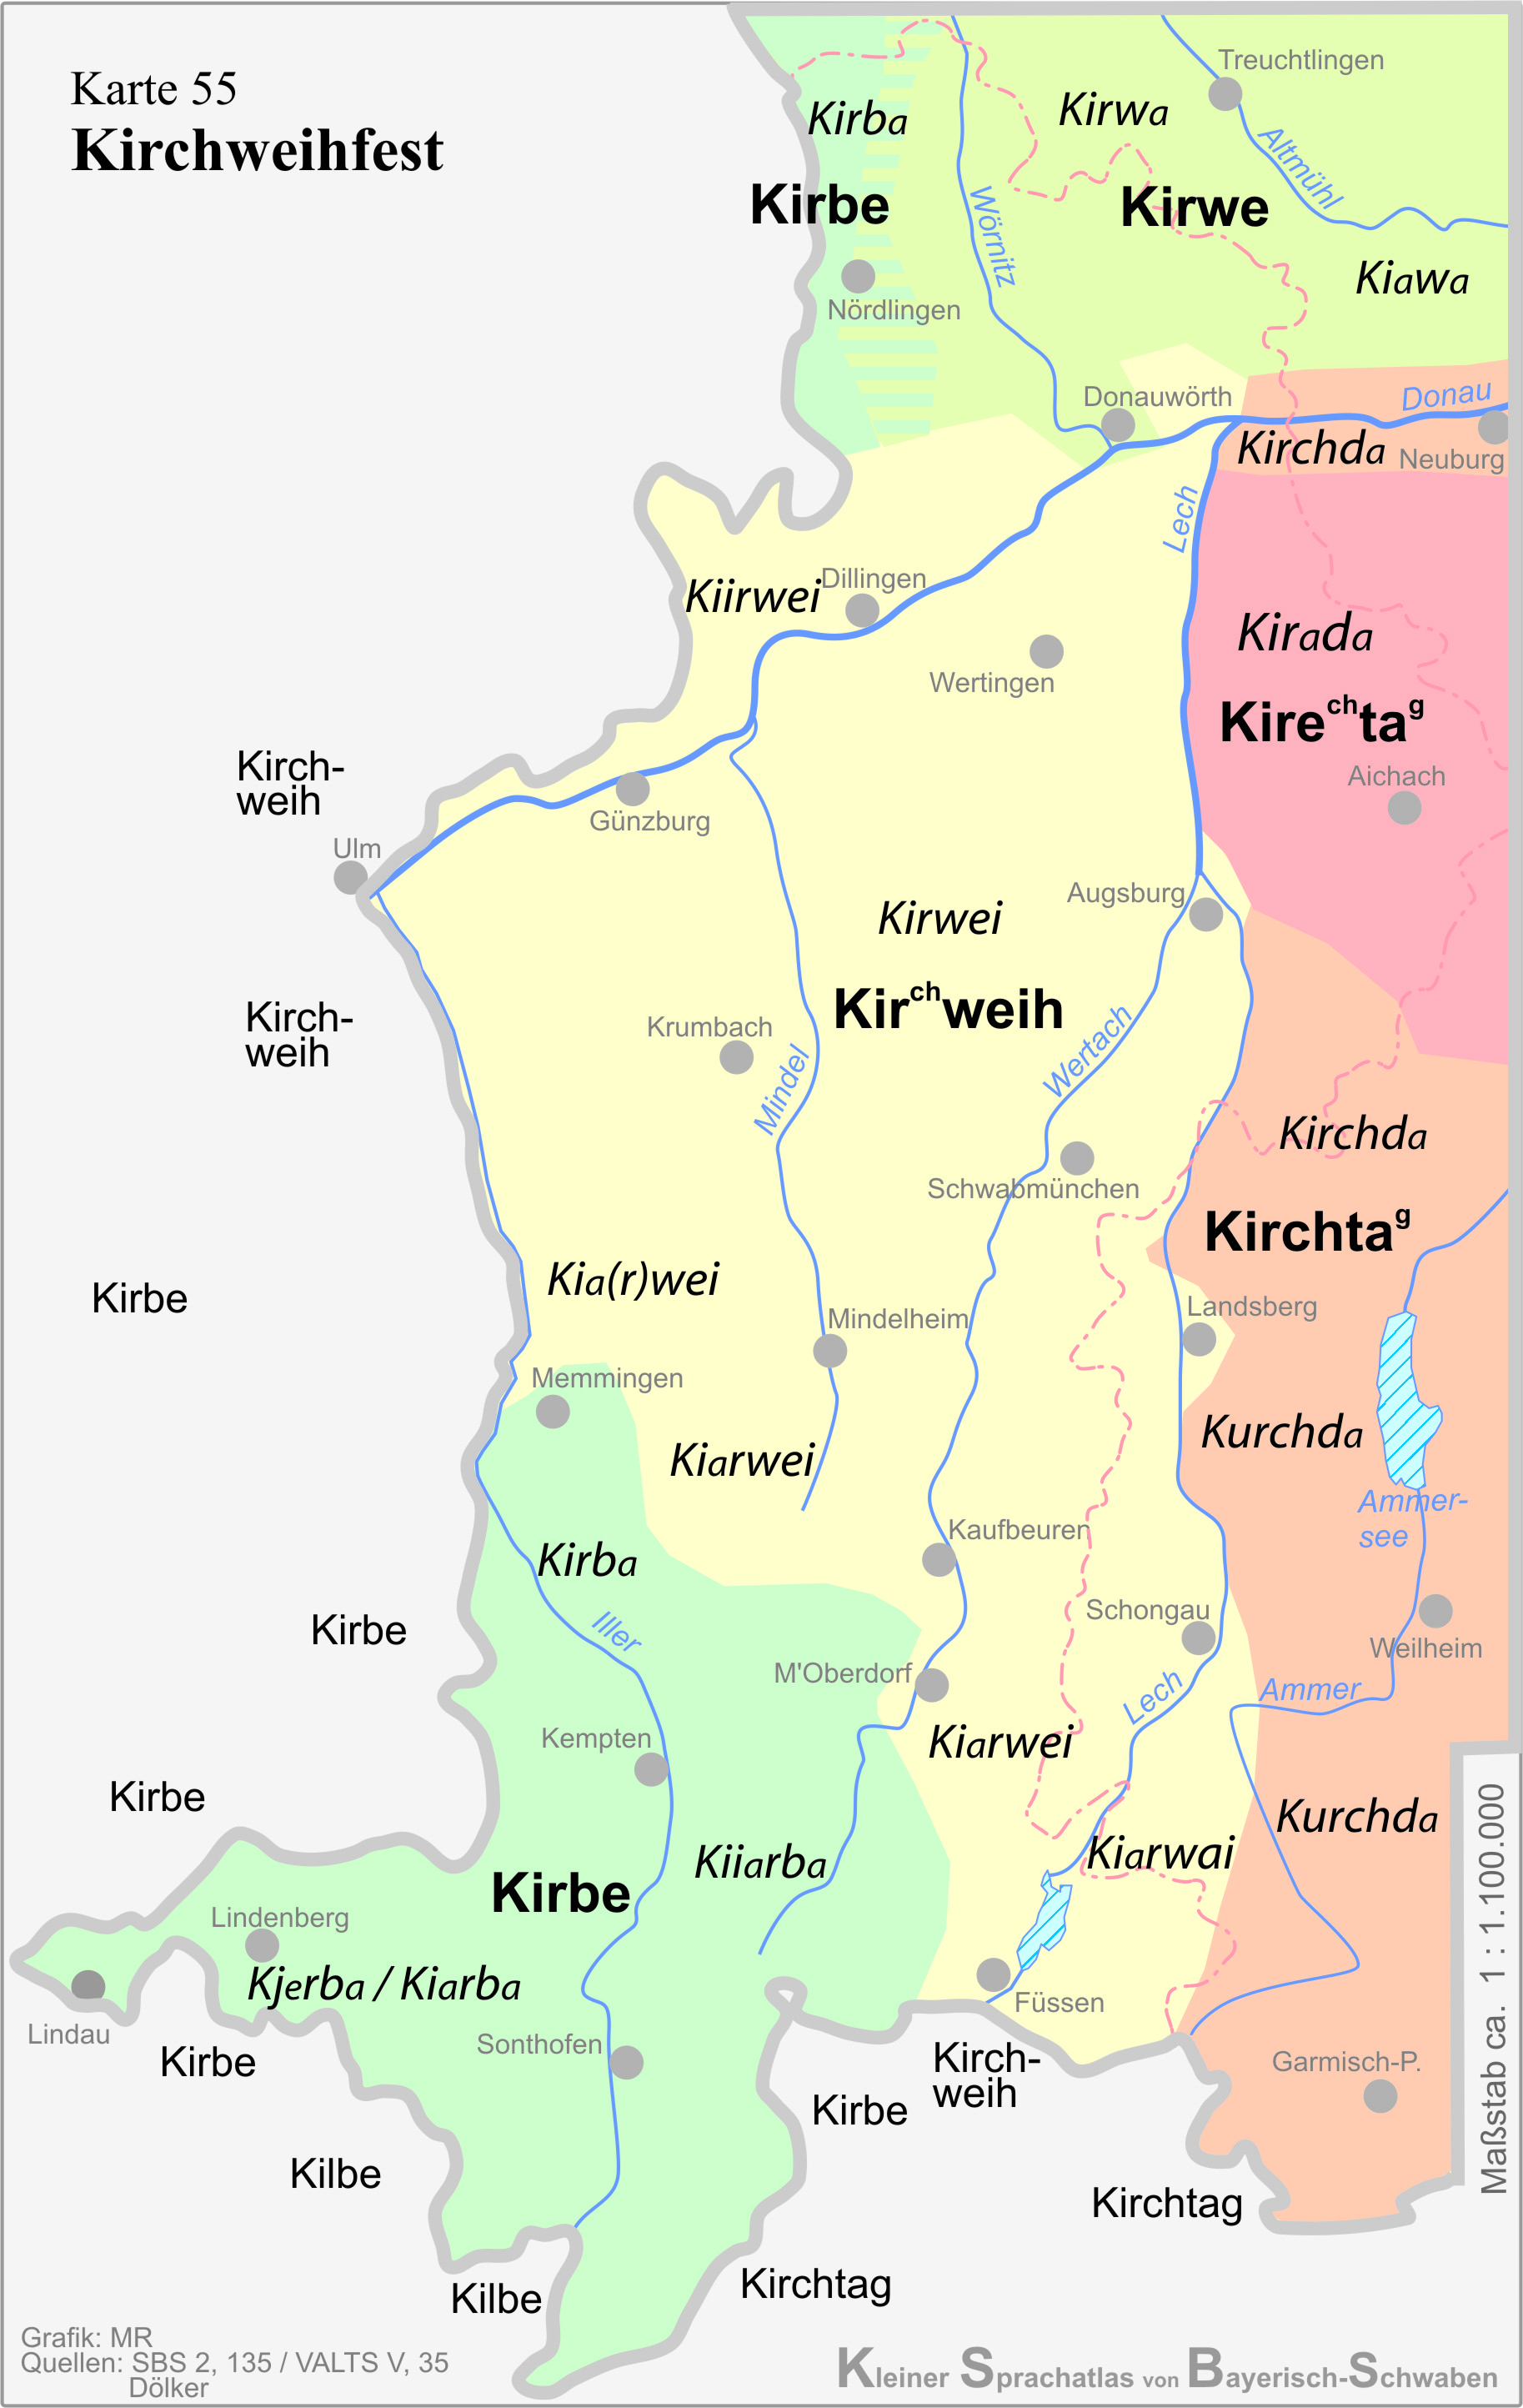 Regionally different terms for the word "Kirchweihfest"